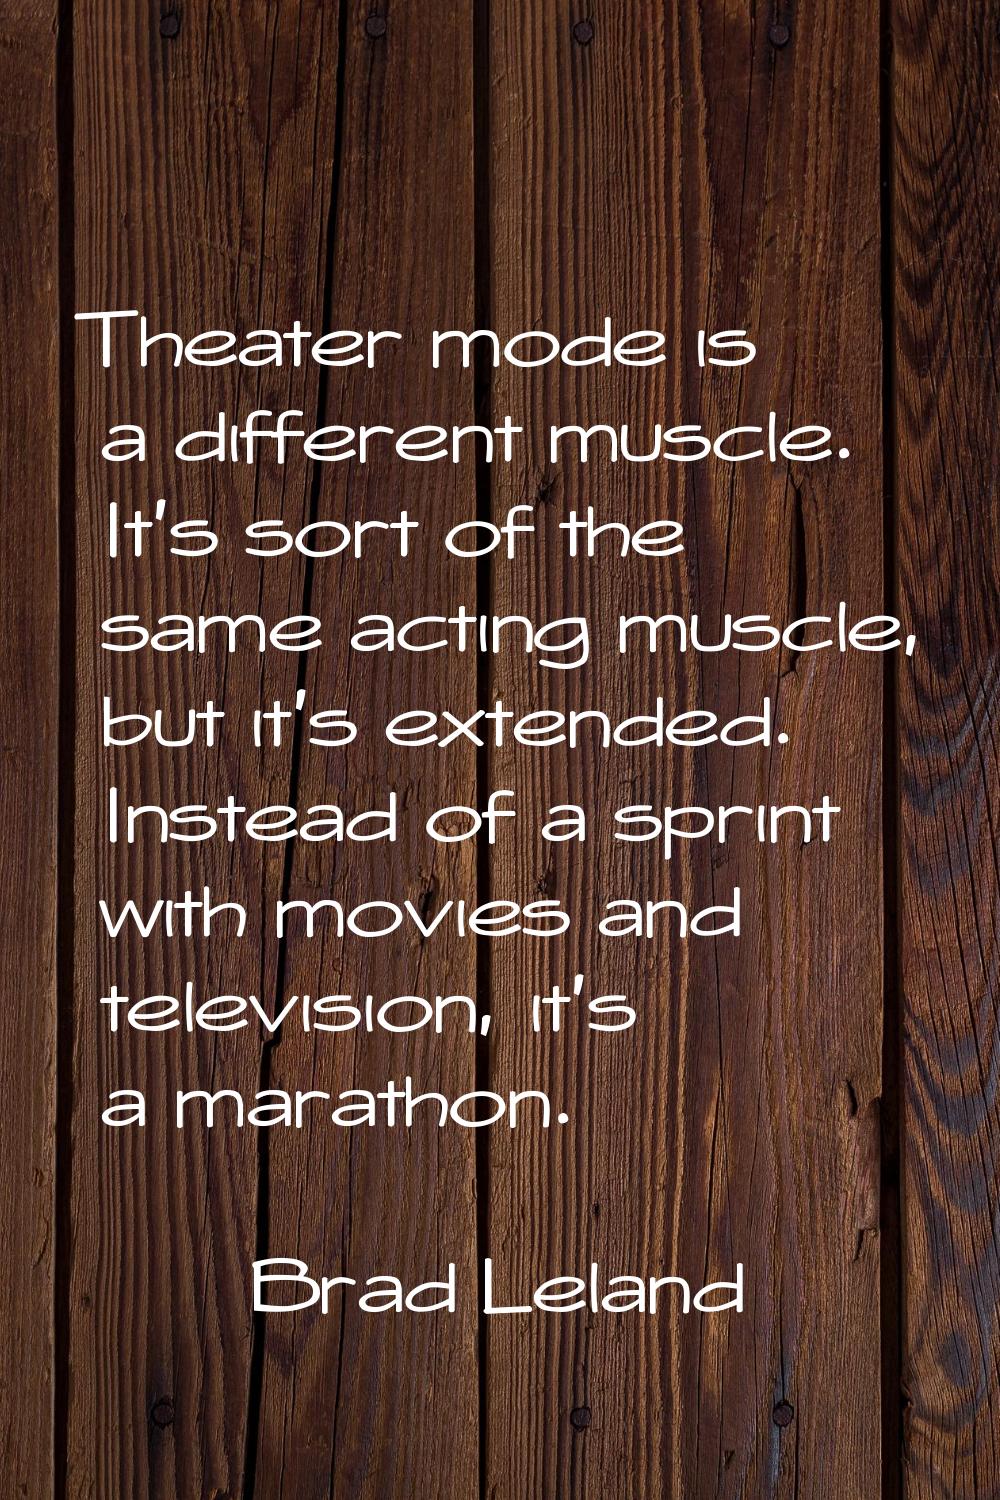 Theater mode is a different muscle. It's sort of the same acting muscle, but it's extended. Instead